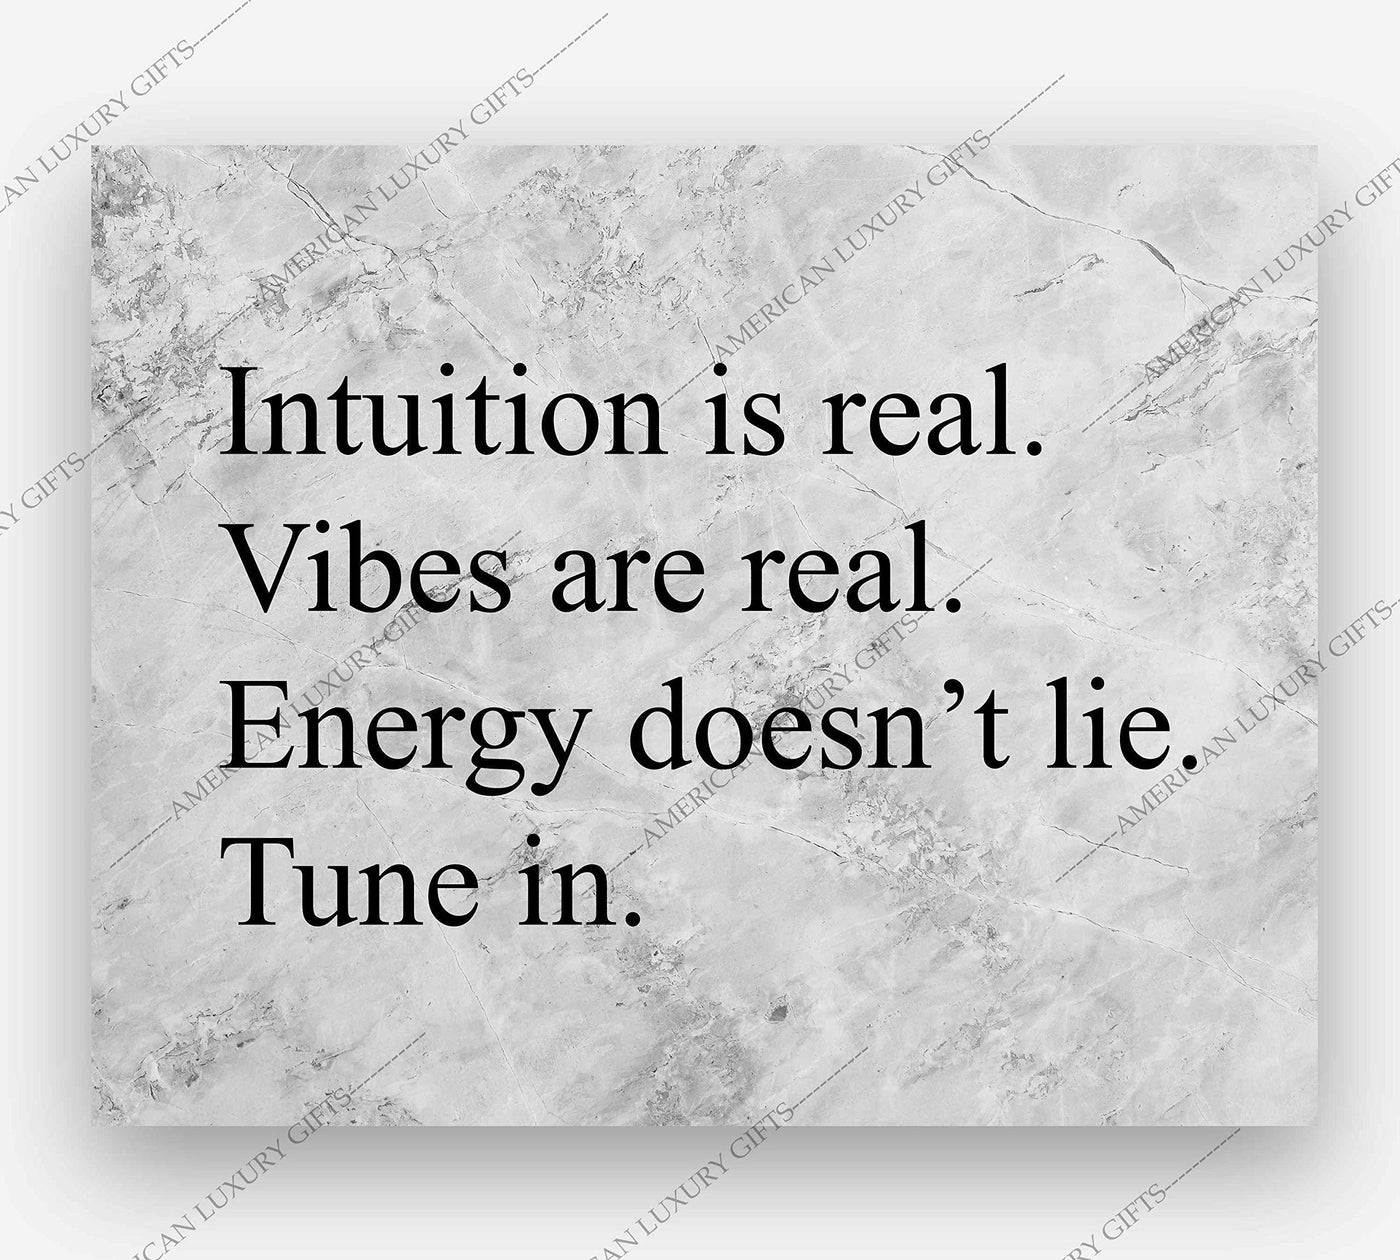 Energy Doesn't Lie-Tune In Spiritual Quotes Wall Art- 10 x 8" Modern Typographic Print-Ready to Frame. Inspirational Home-Studio-Dorm-Meditation-Zen Decor! Great Positive Decoration for All!